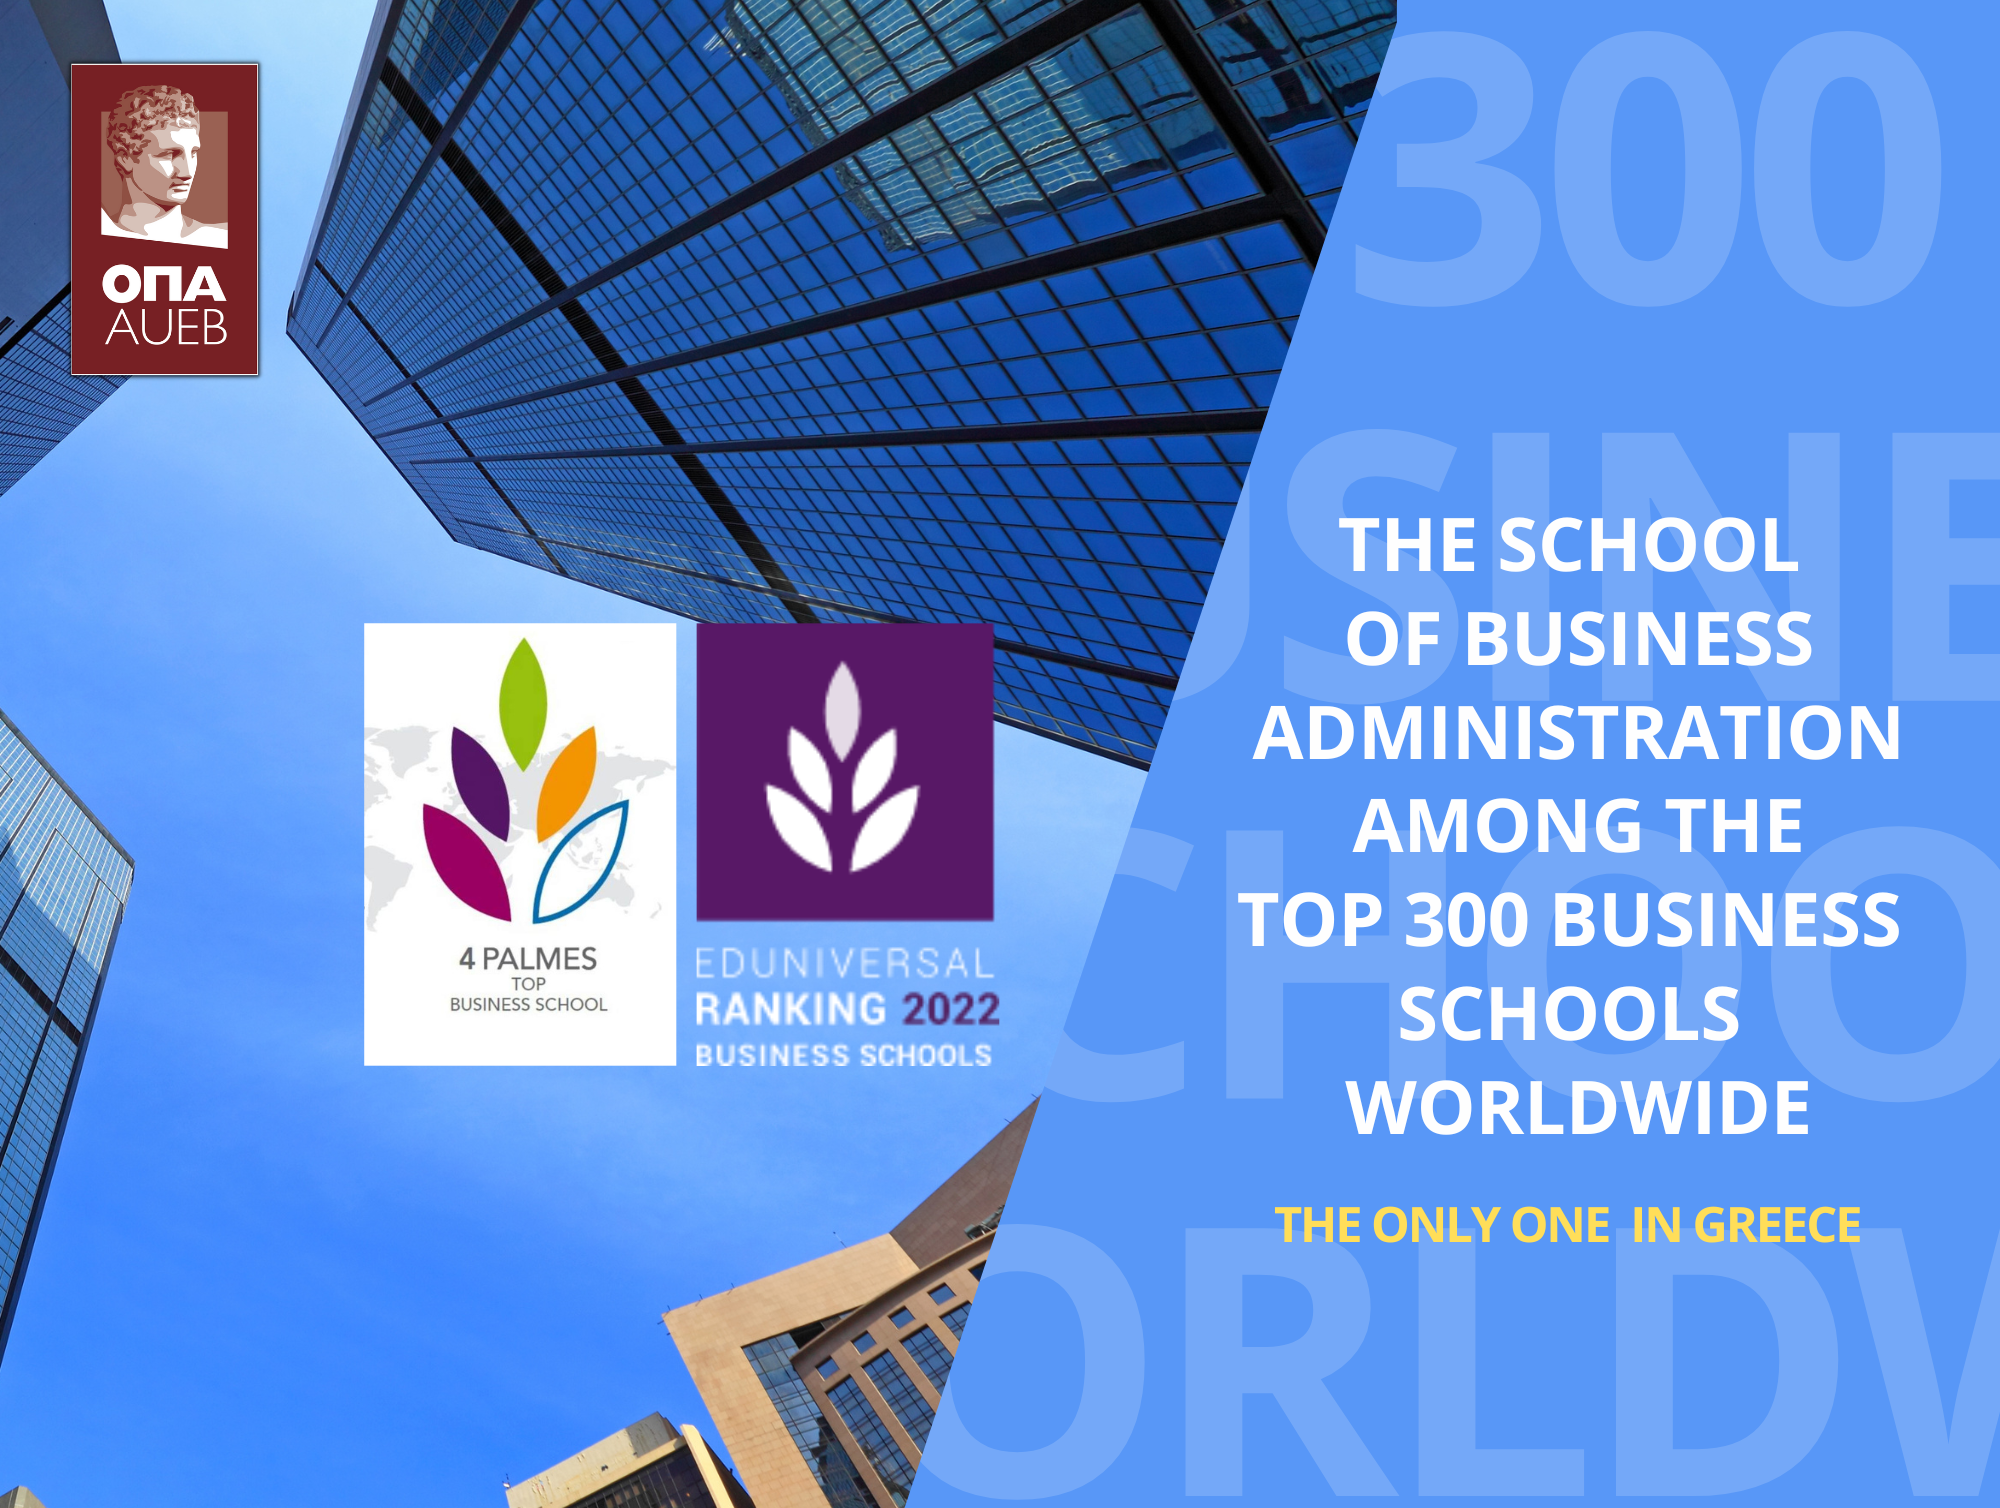 AUEB’s School of Business Administration among the "Top 300 Business Schools" worldwide according to Eduniversal